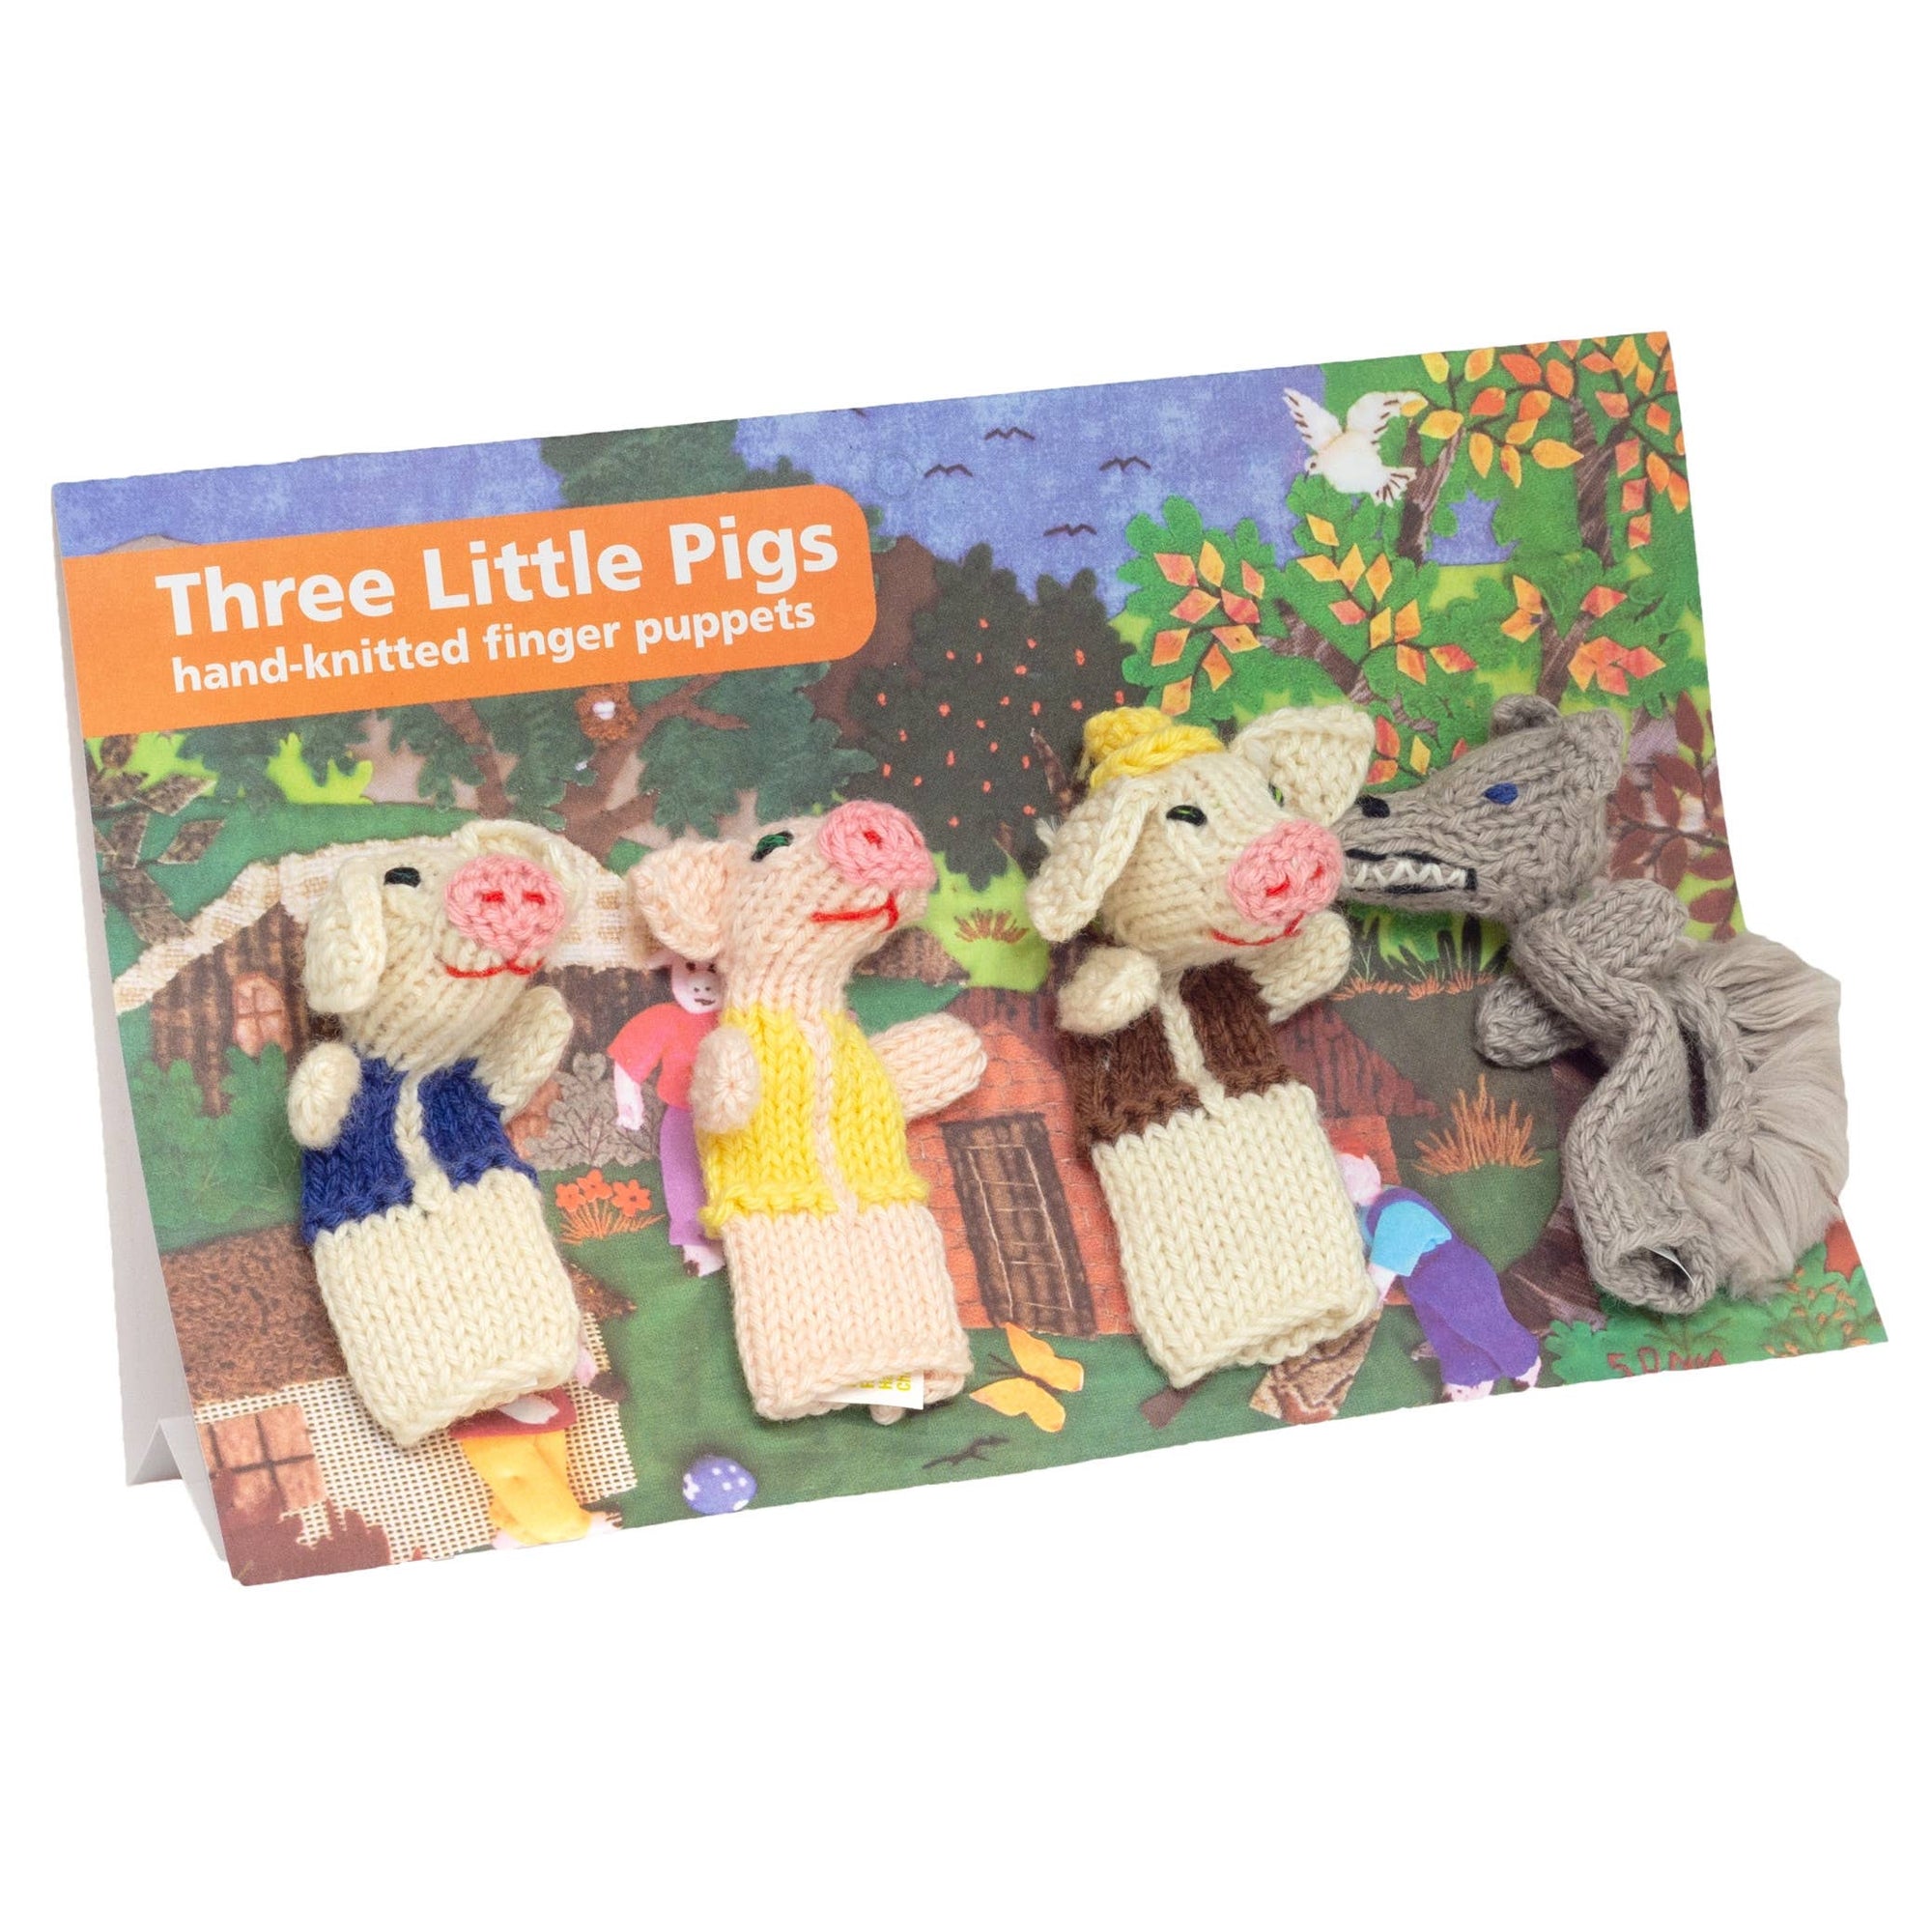 Three Little Pigs Story Pack of 4 - Organic Cotton Finger Puppets